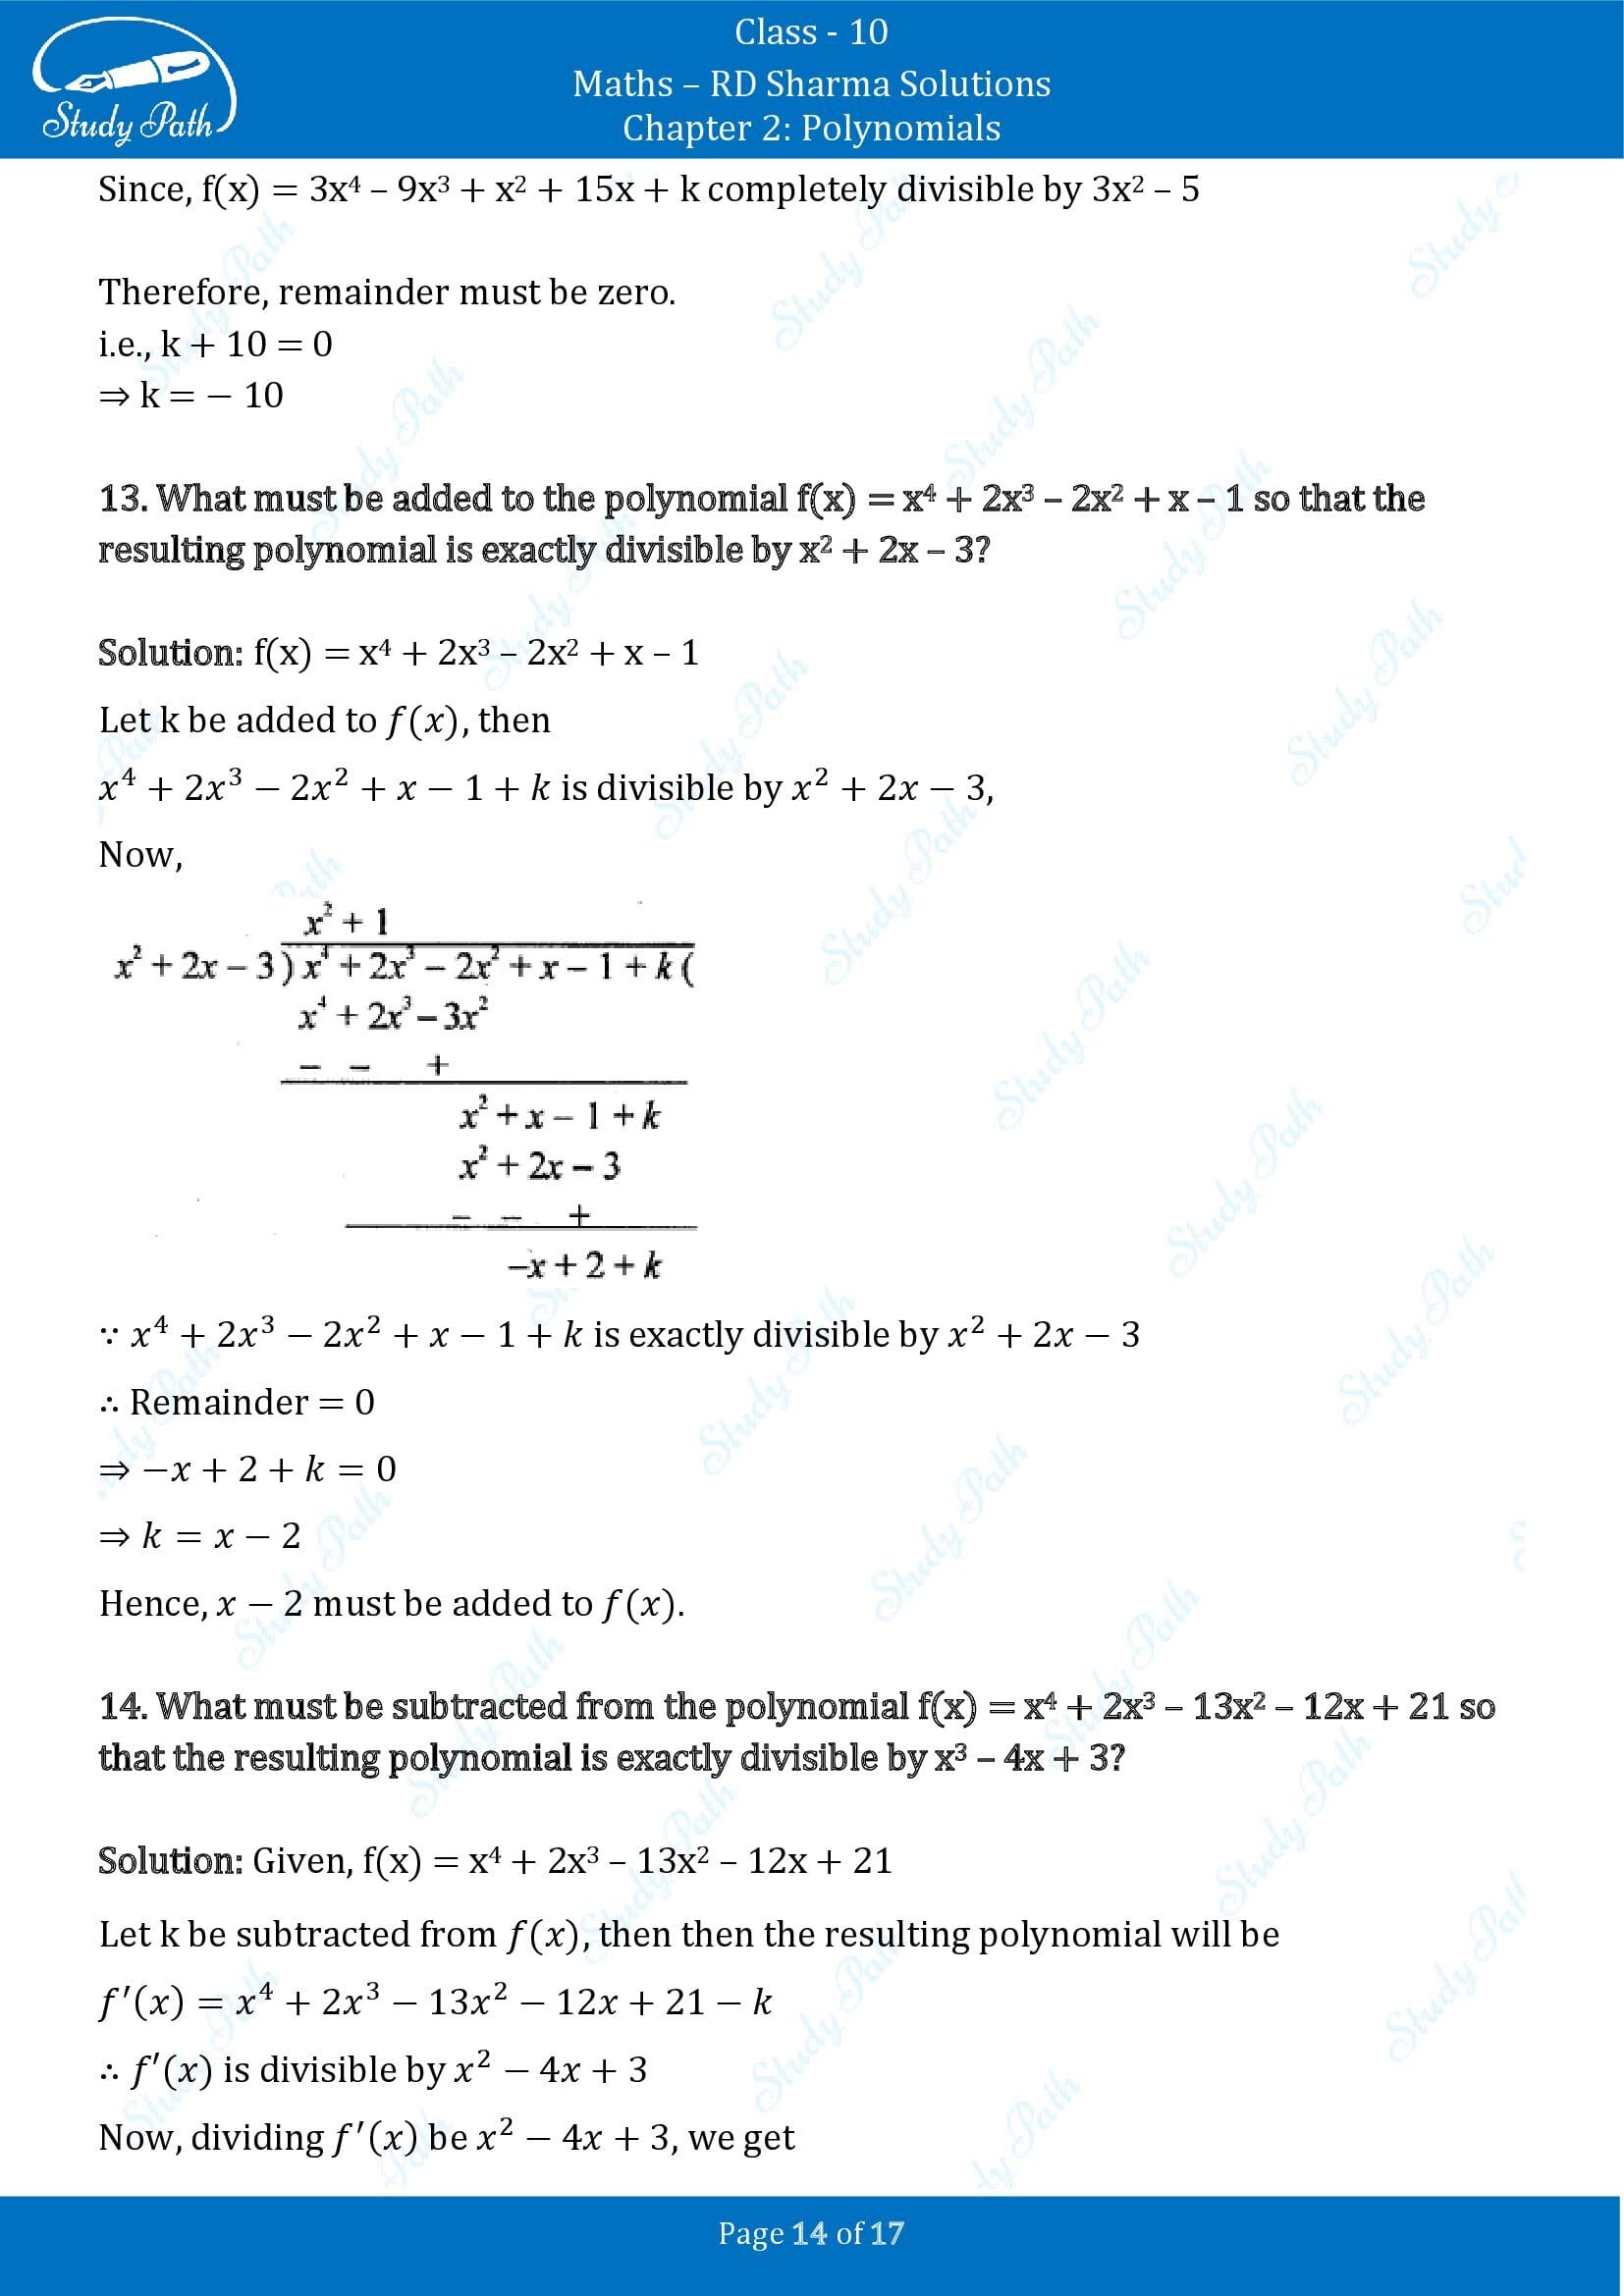 RD Sharma Solutions Class 10 Chapter 2 Polynomials Exercise 2.3 00014